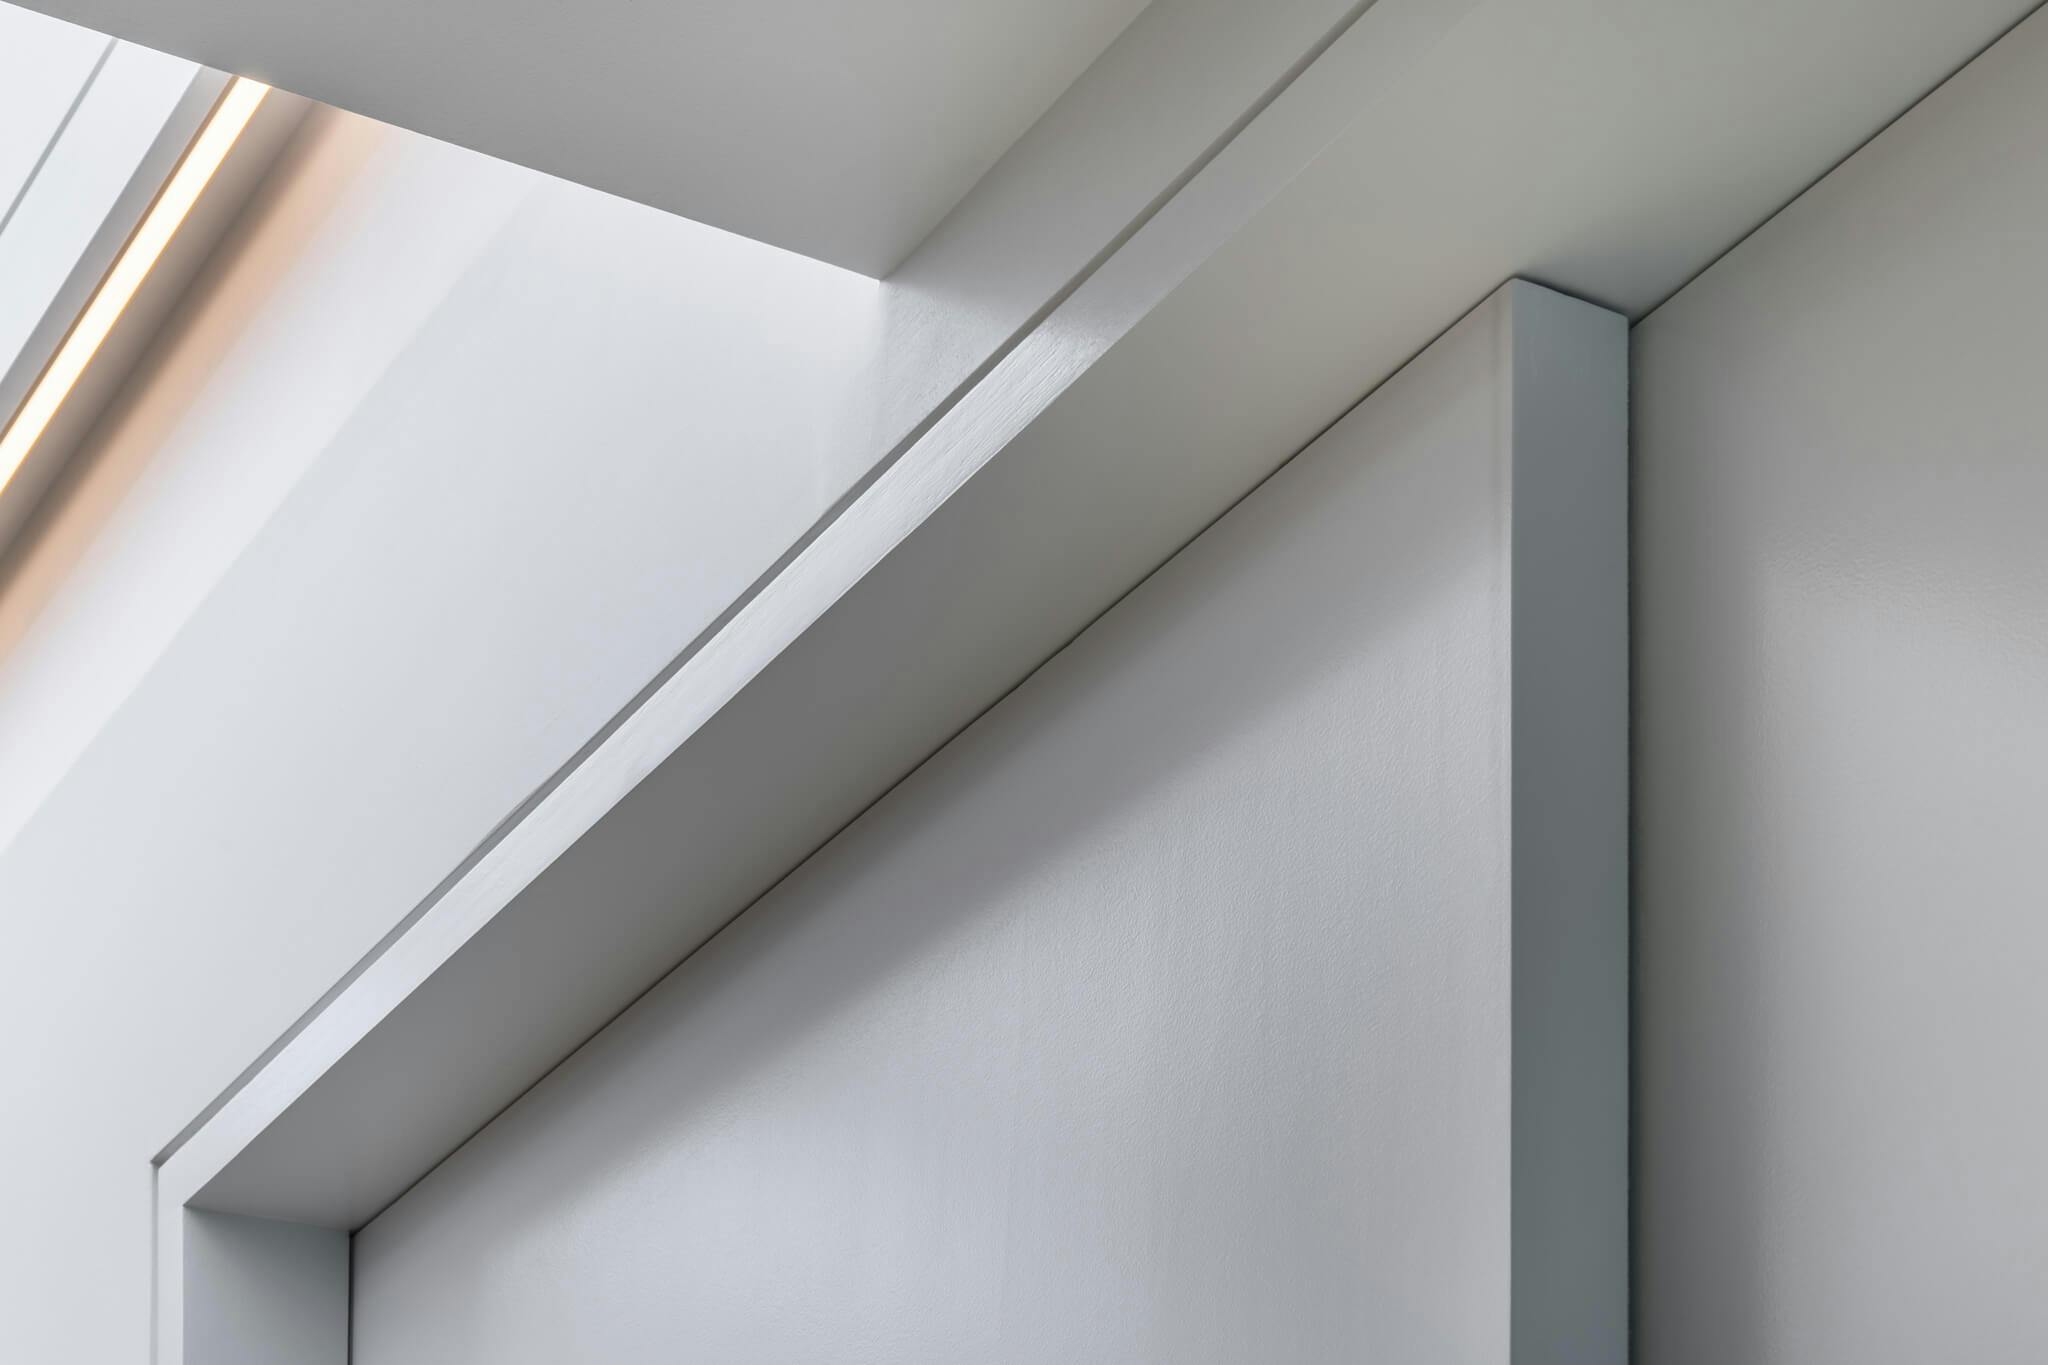 A detailed view of a set of closed white telescopic sliding doors.